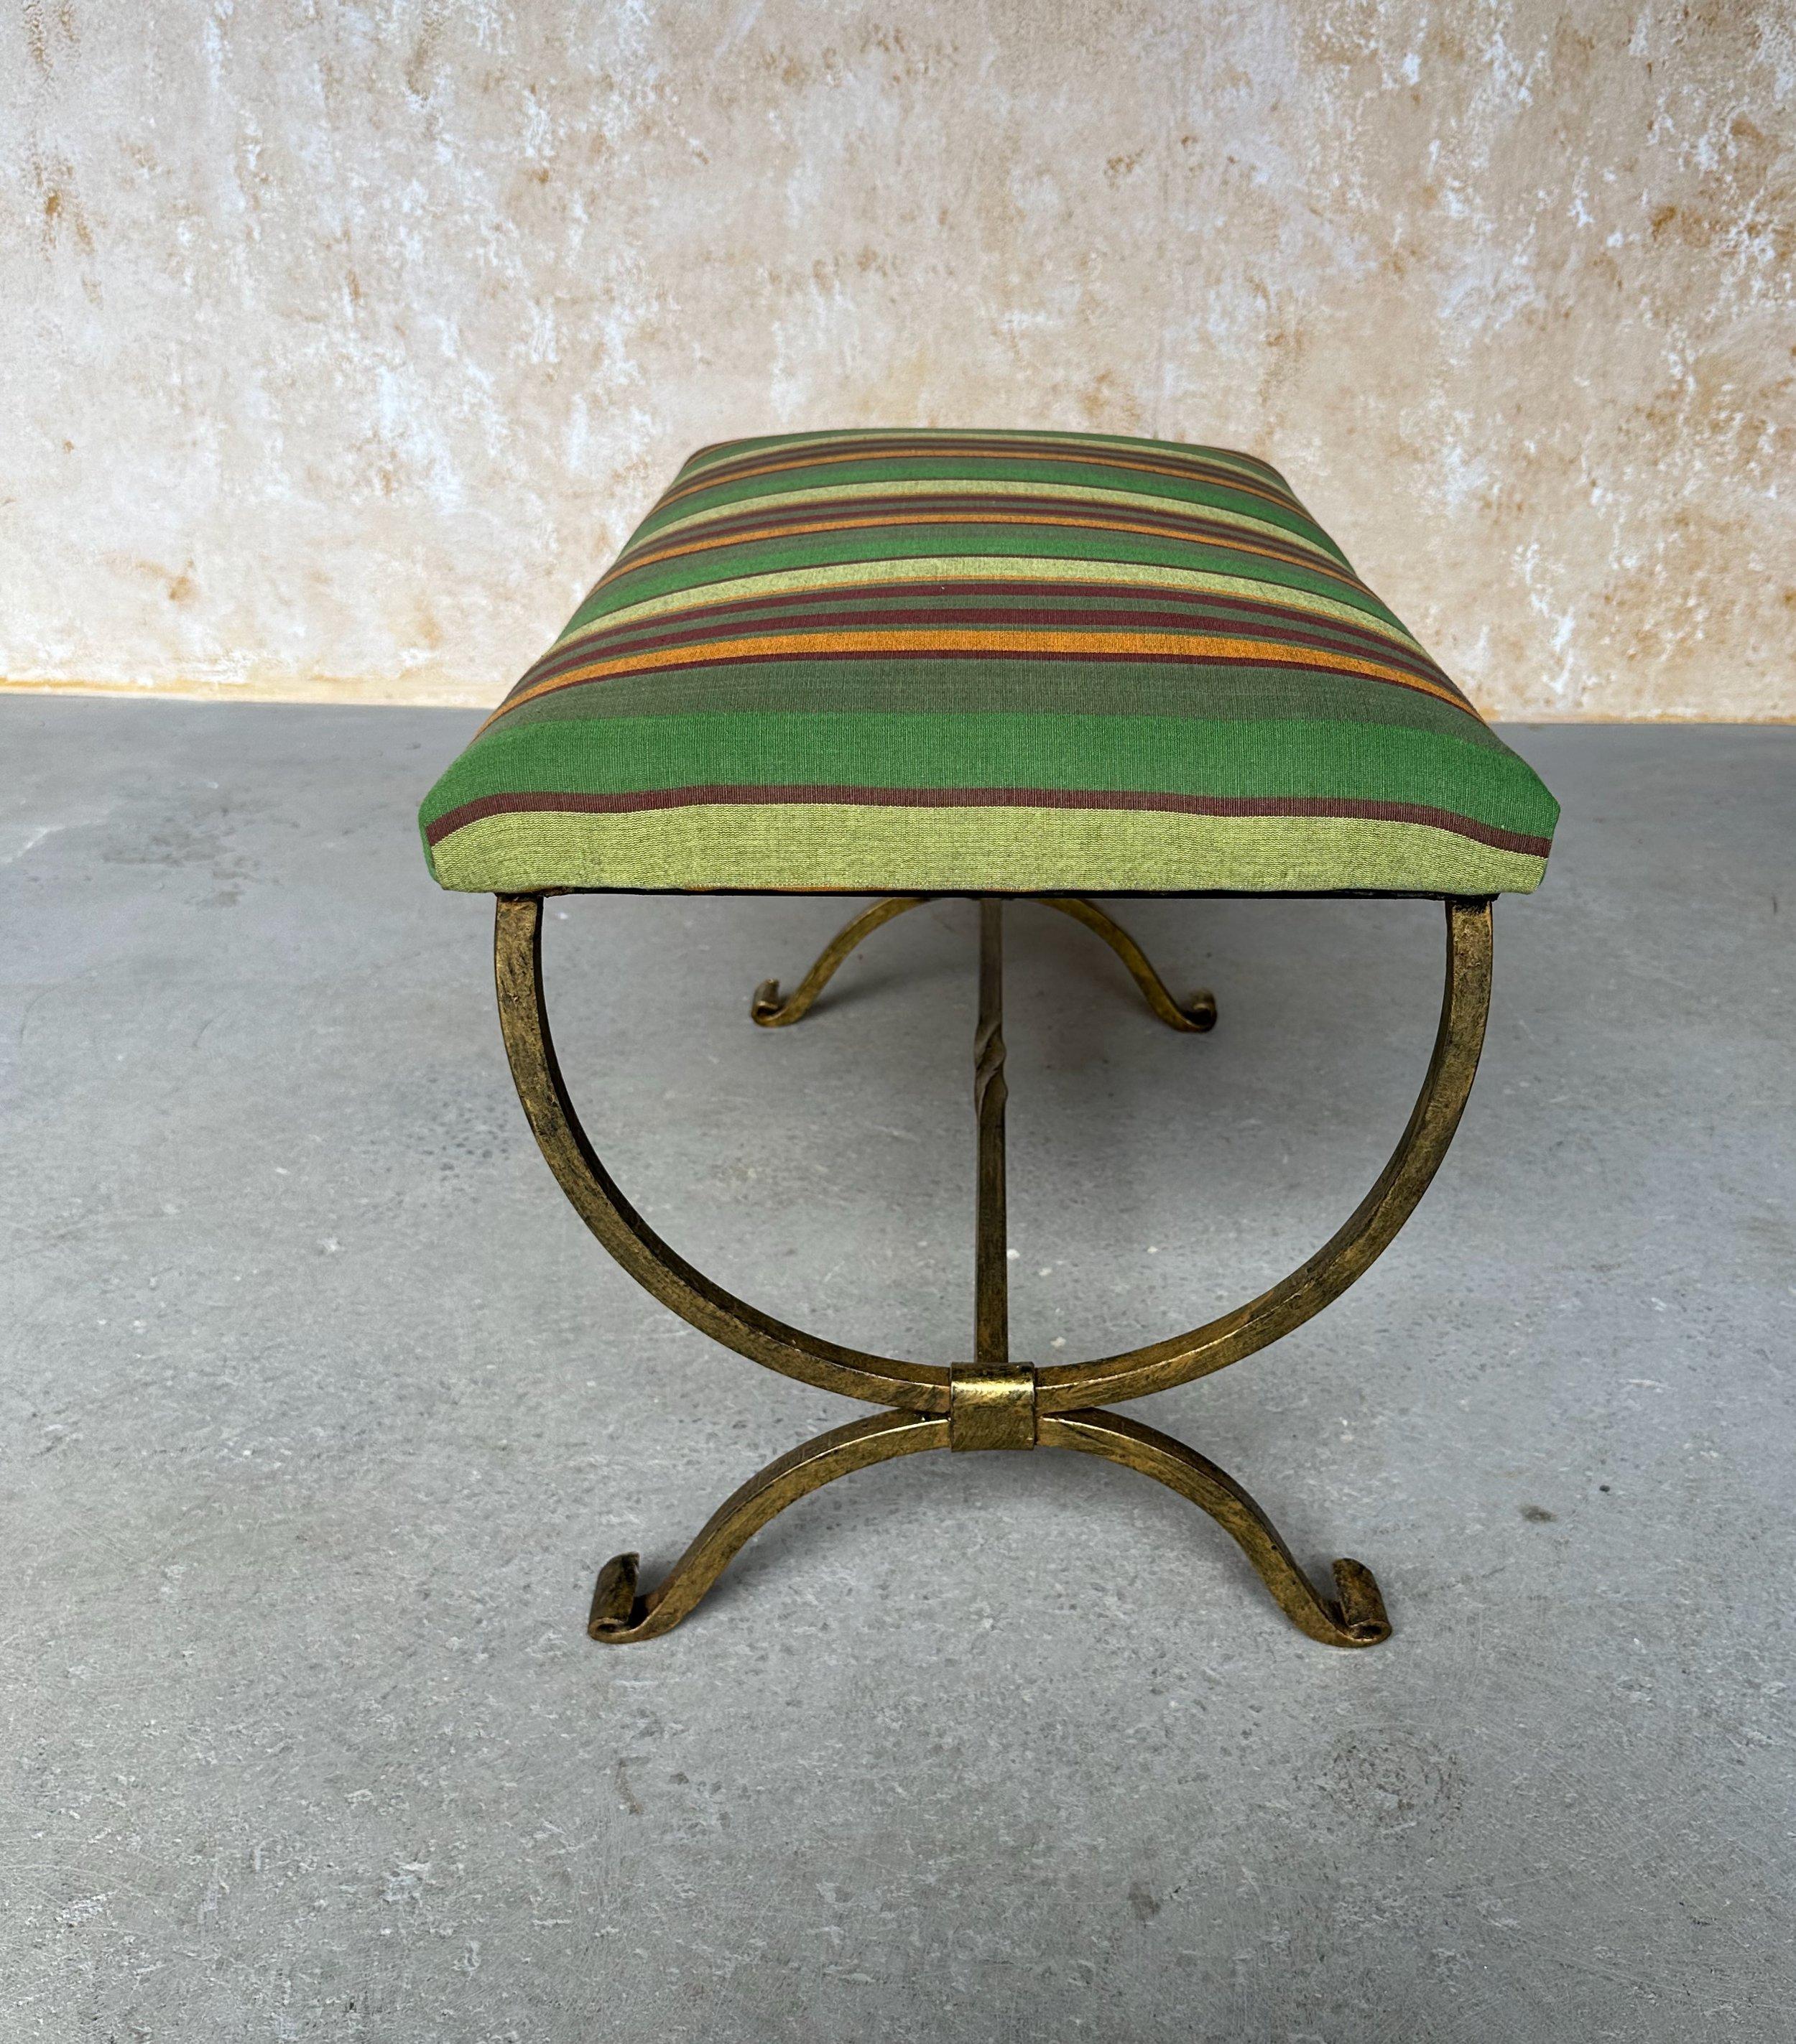 Contemporary Spanish Iron Bench in Striped Fabric For Sale